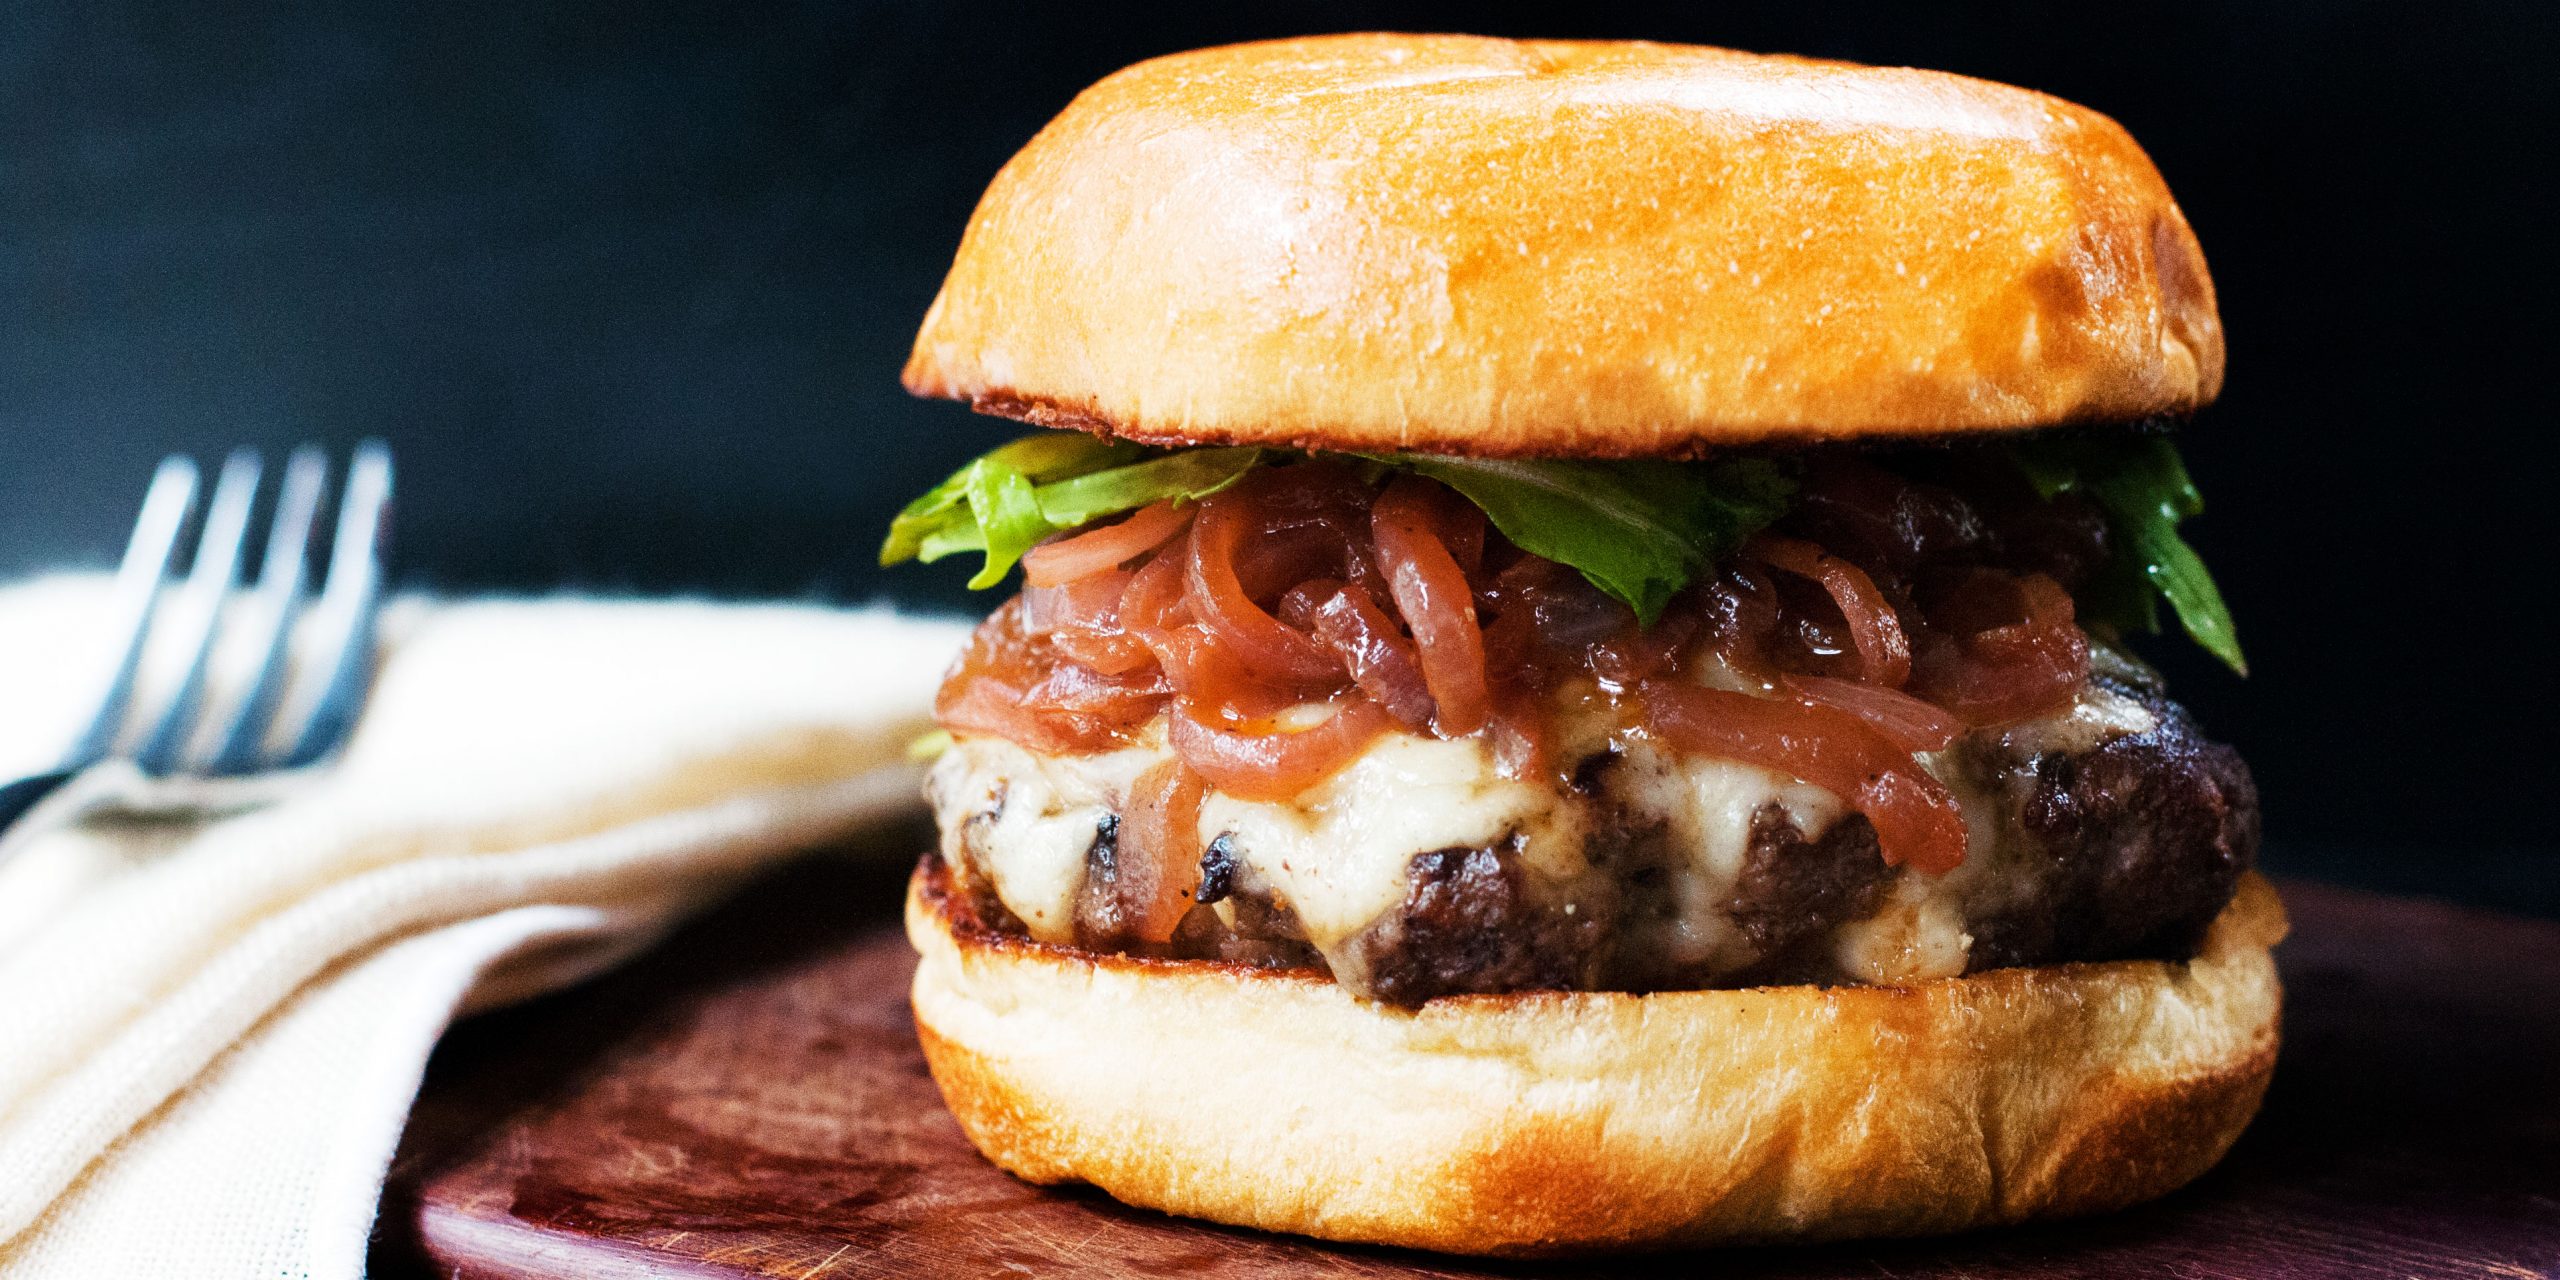 French Onion Soup Burgers Recipe - Andrew Zimmern